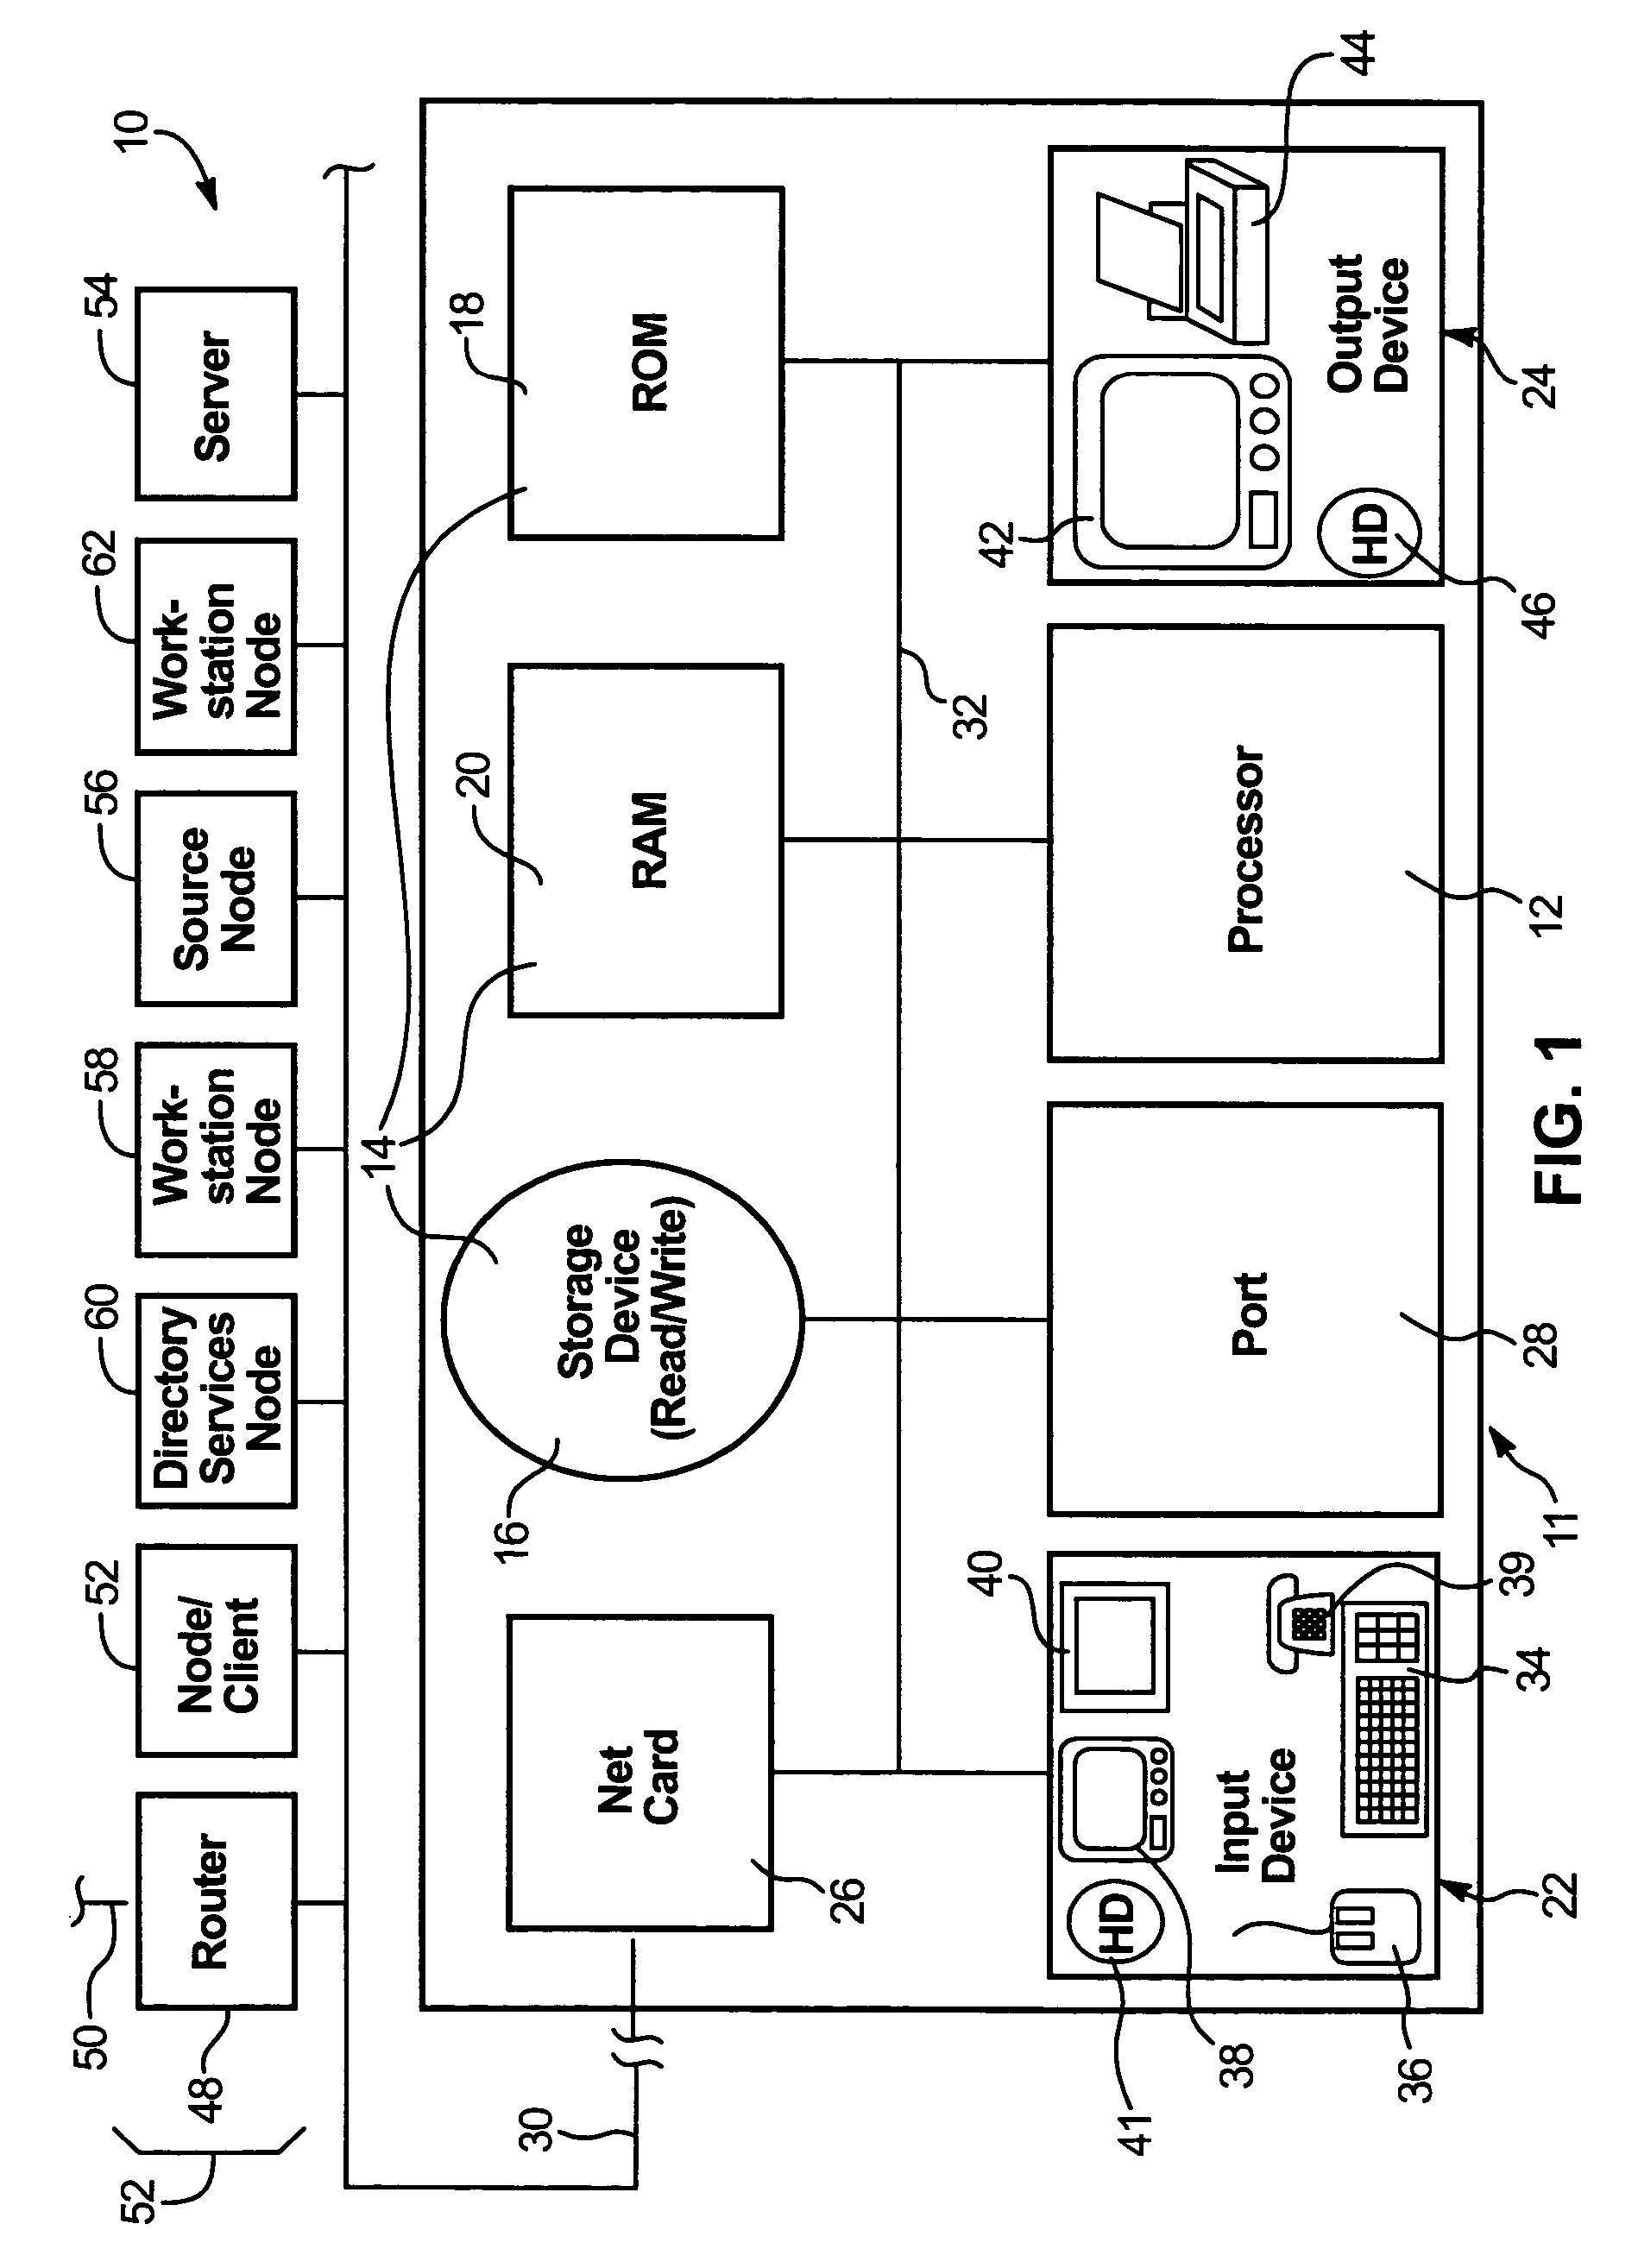 Online transaction hosting apparatus and system